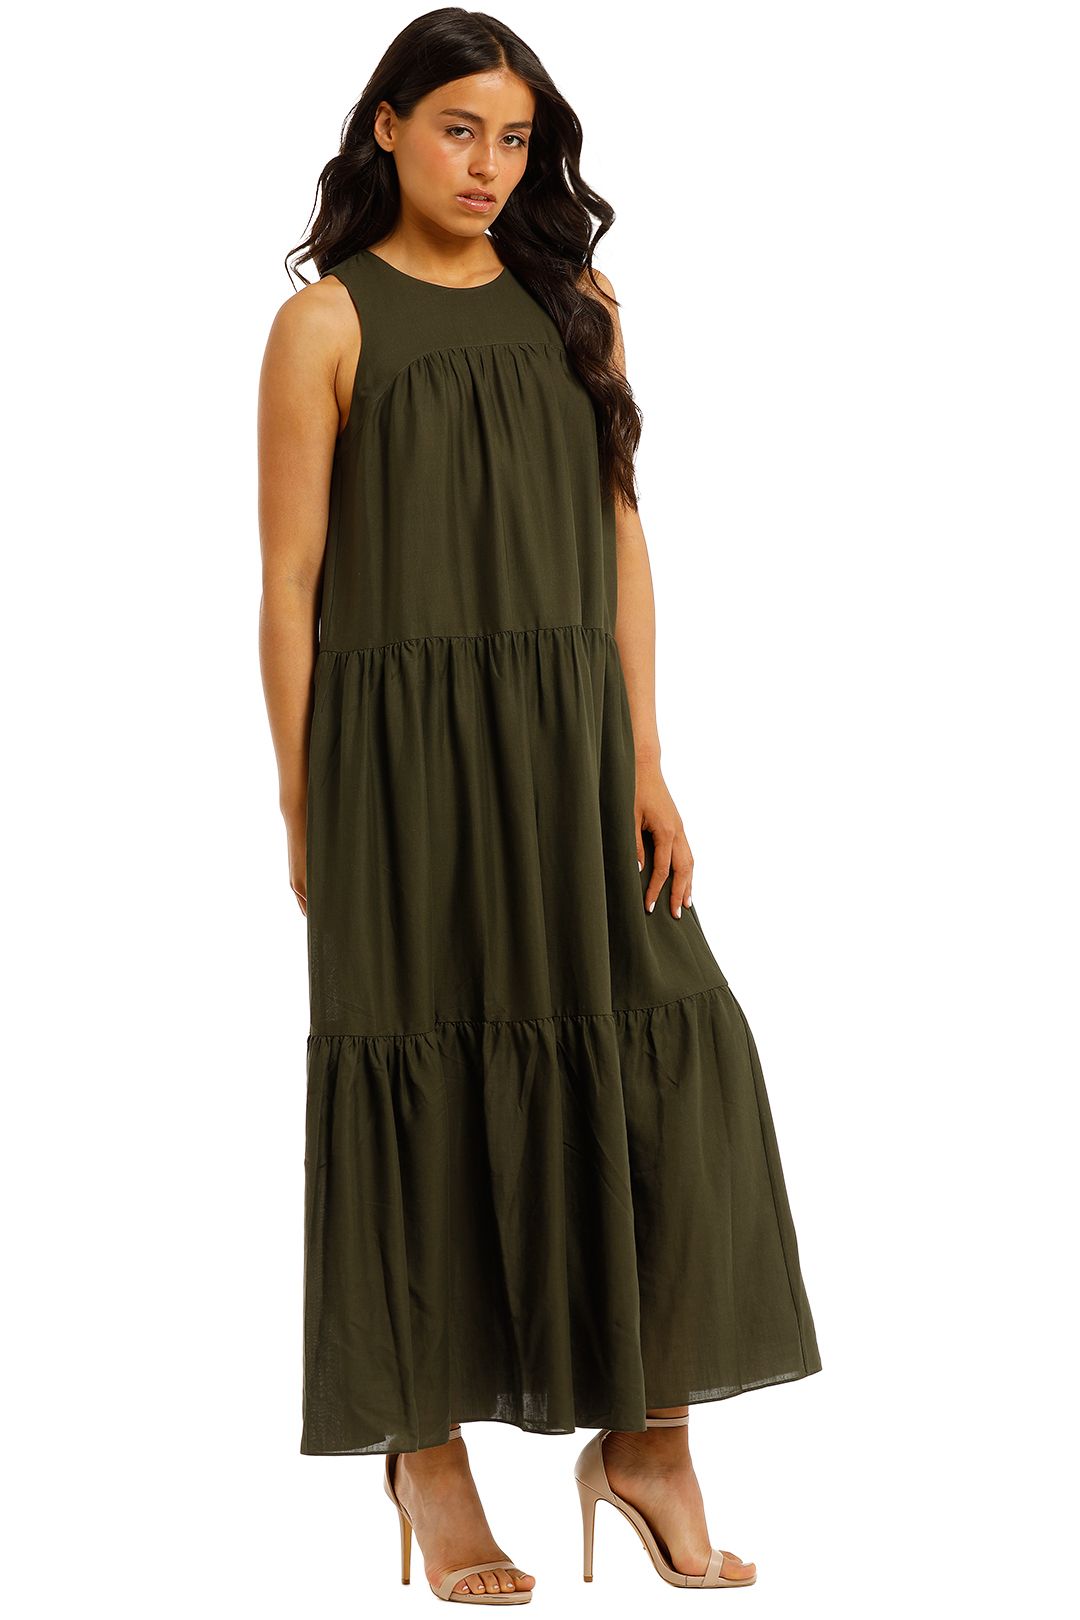 Yoke Tiered Dress in Fern by Witchery for Hire | GlamCorner